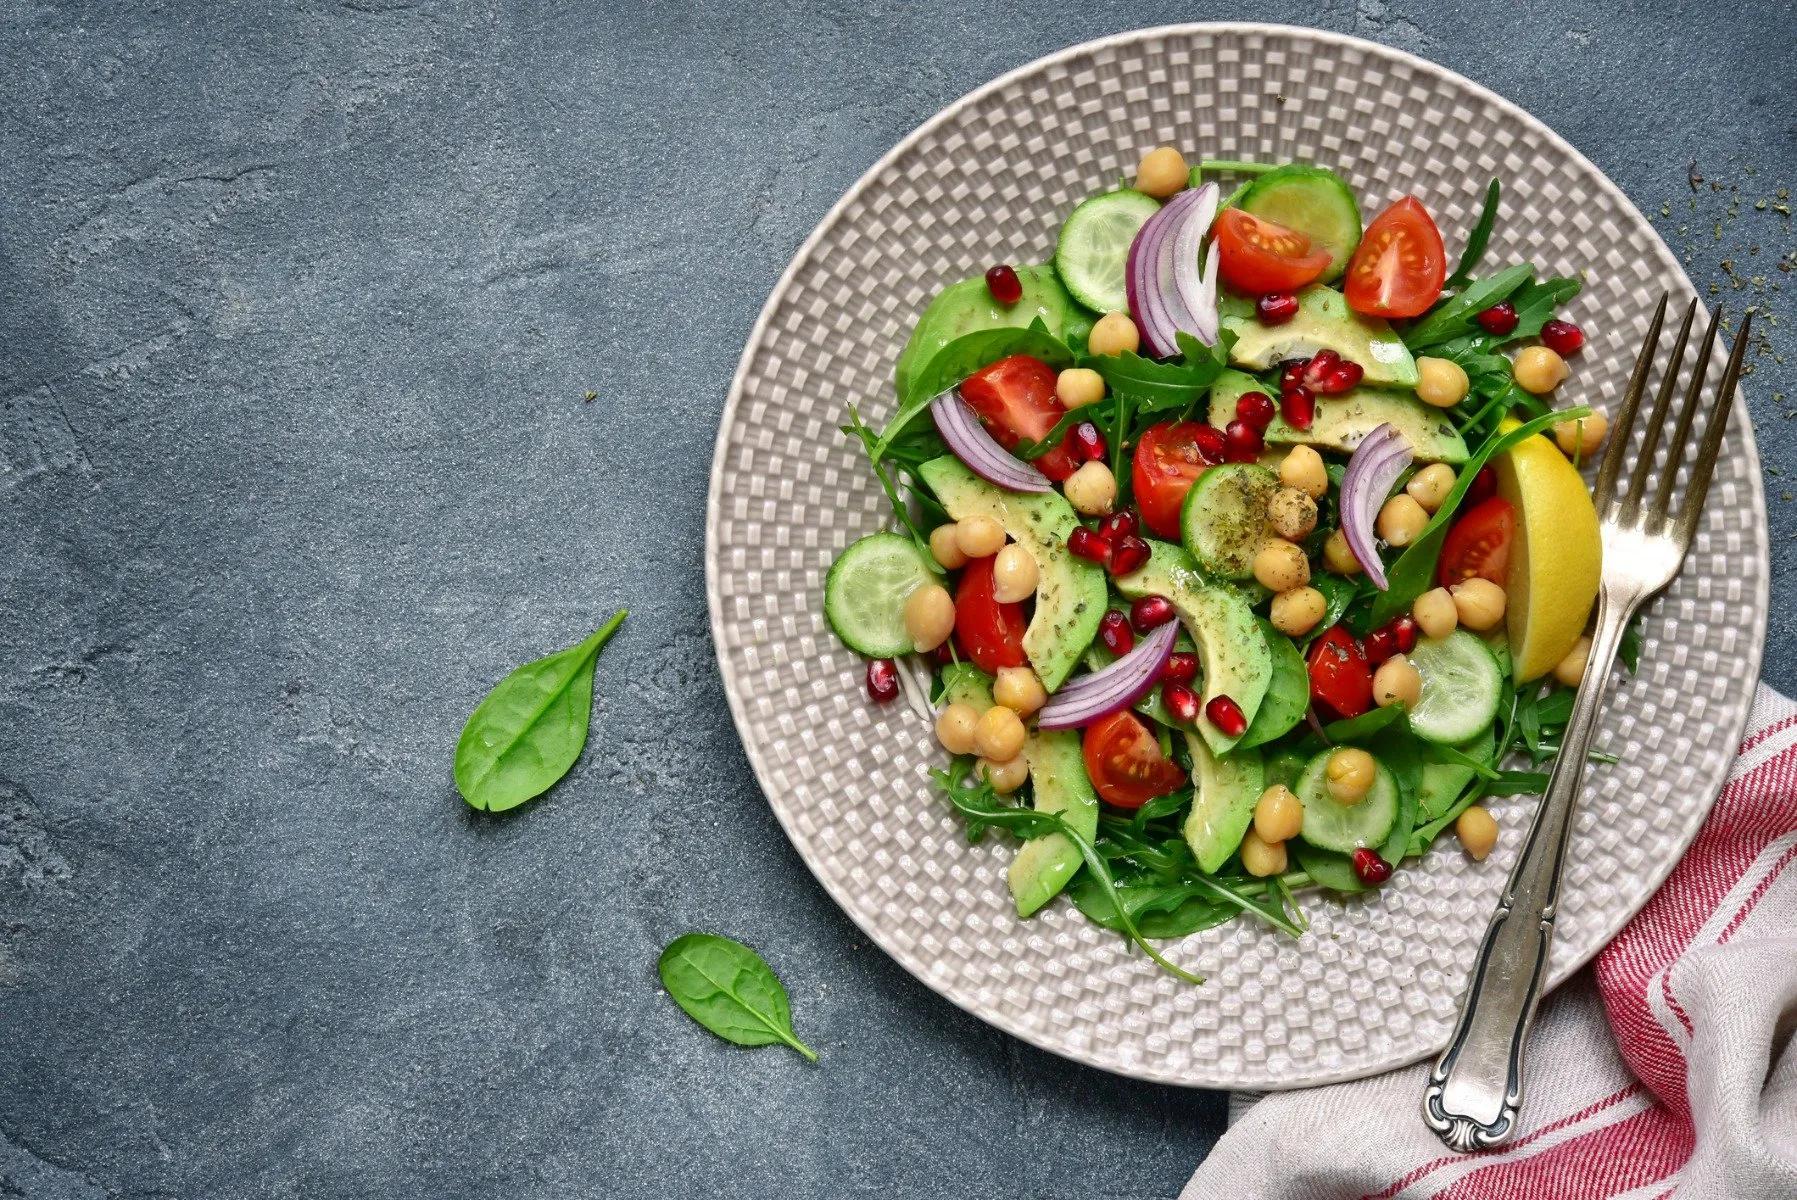 Fitness Recipes for 11 Delicious and Healthy Salads - GymBeam Blog